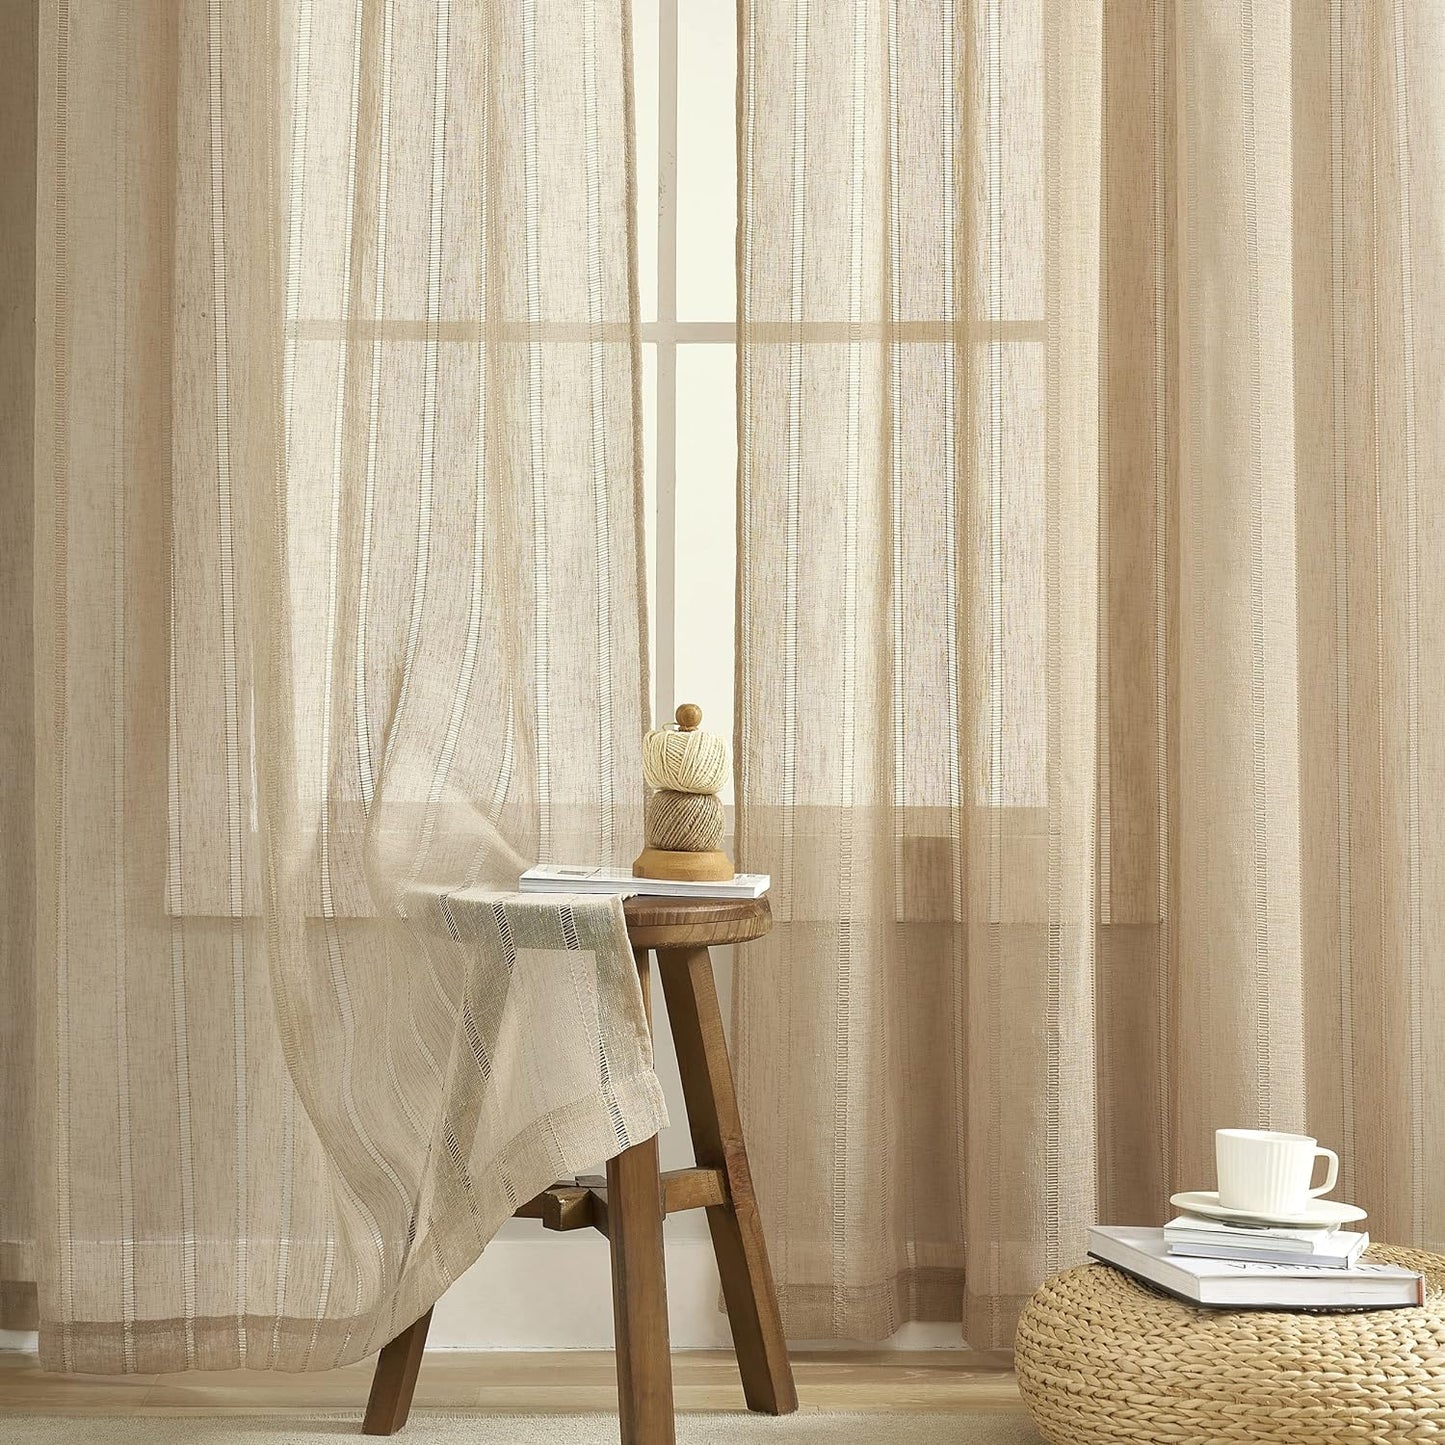 Demetex Sheer Linen Curtains 72 Inches Long Natrual Semi Sheer Curtain Decorative Panels for Living Room Bedroom Porch Window Dressing, 54 X 72 Inches, 2 Pieces, Beige  Demetex Striped Linen W 54"X L 63" 